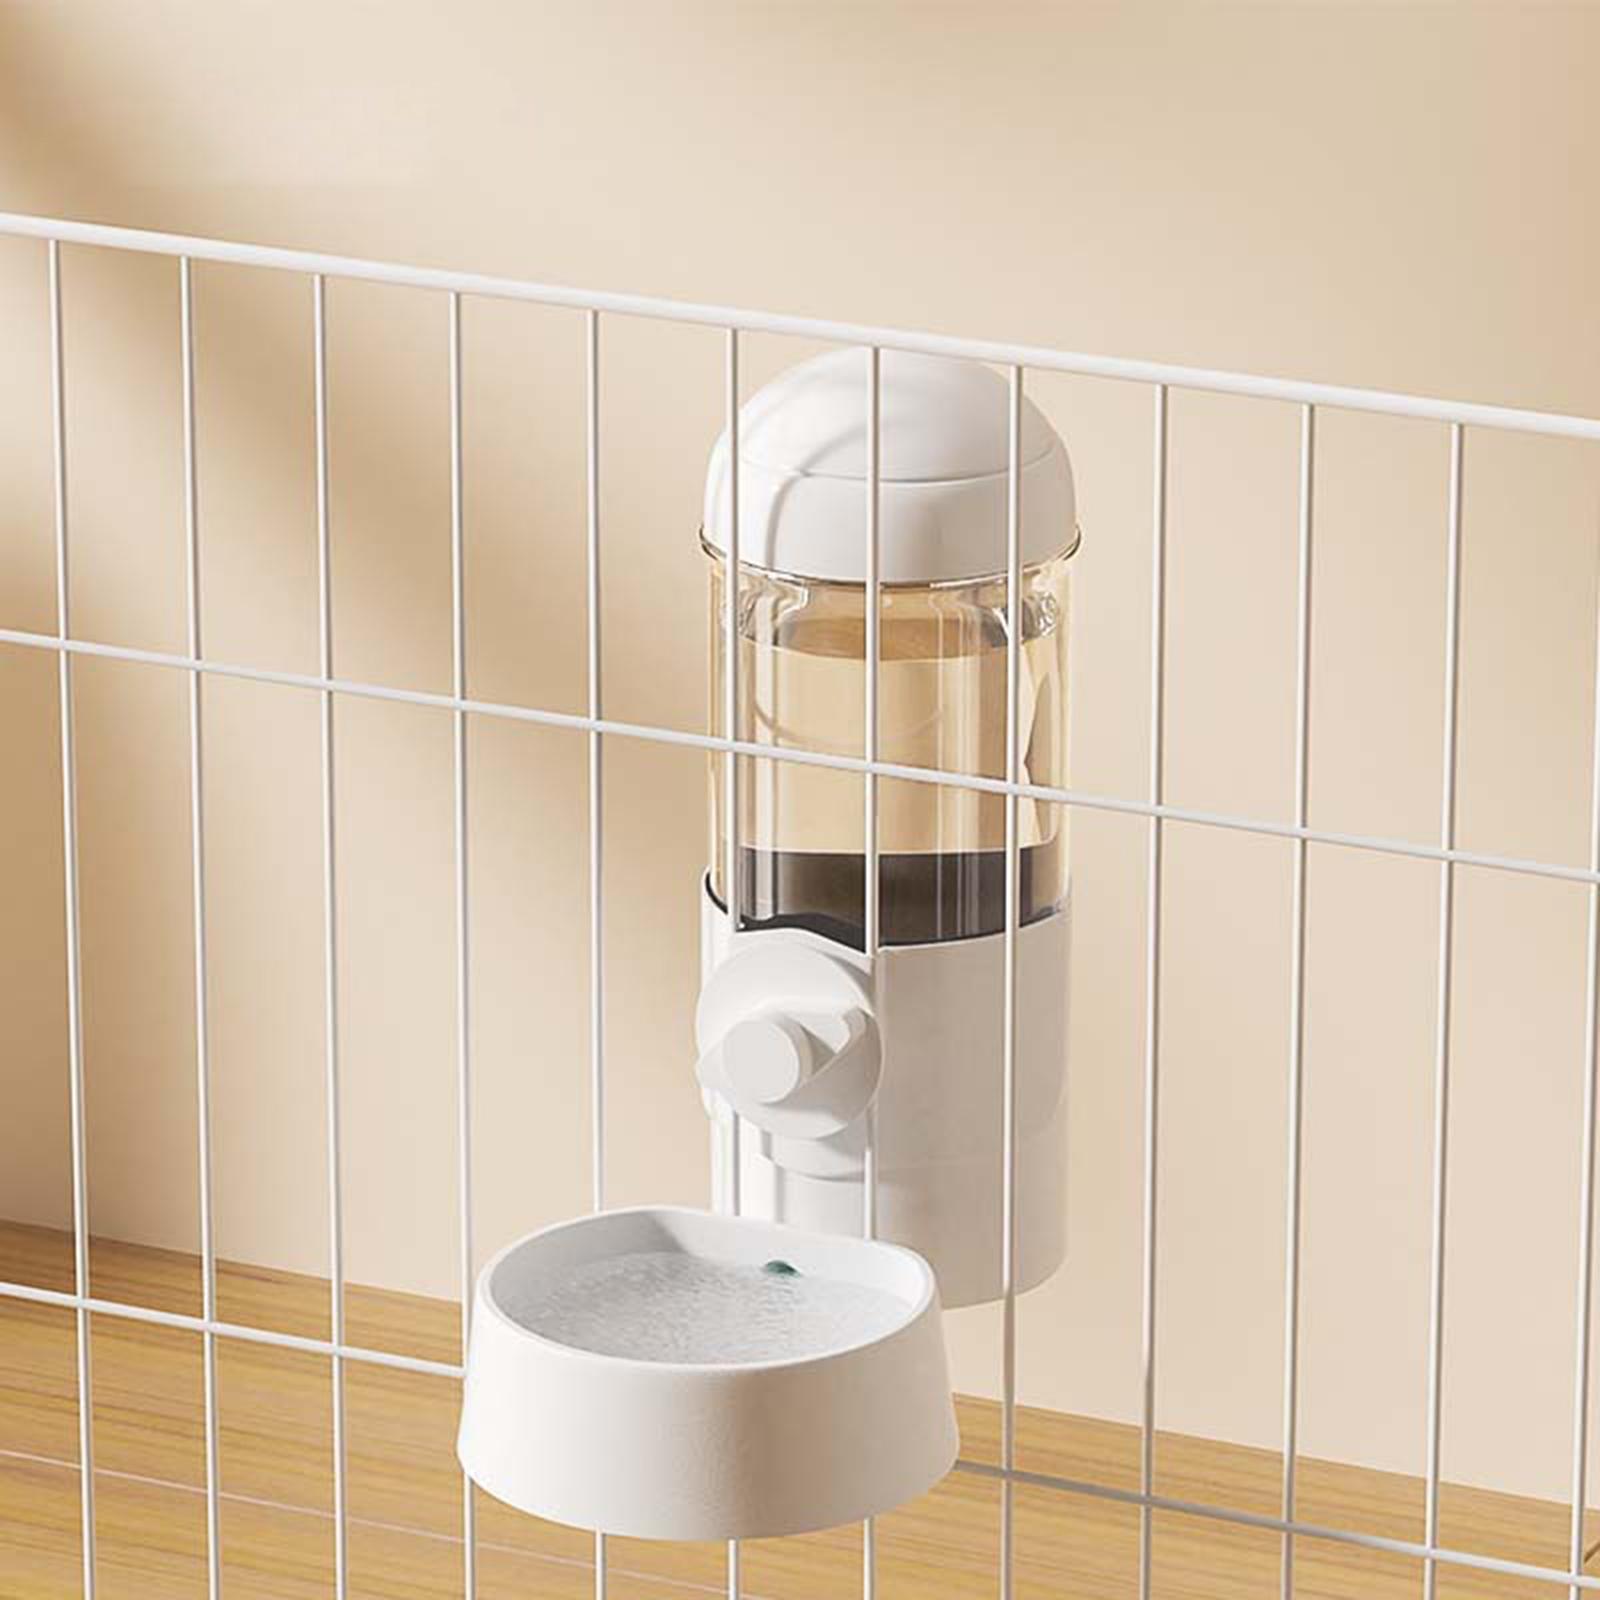 Pet Water Drinker Automatic Bowl Pet Water Fountain for Rabbits Puppy Kitten